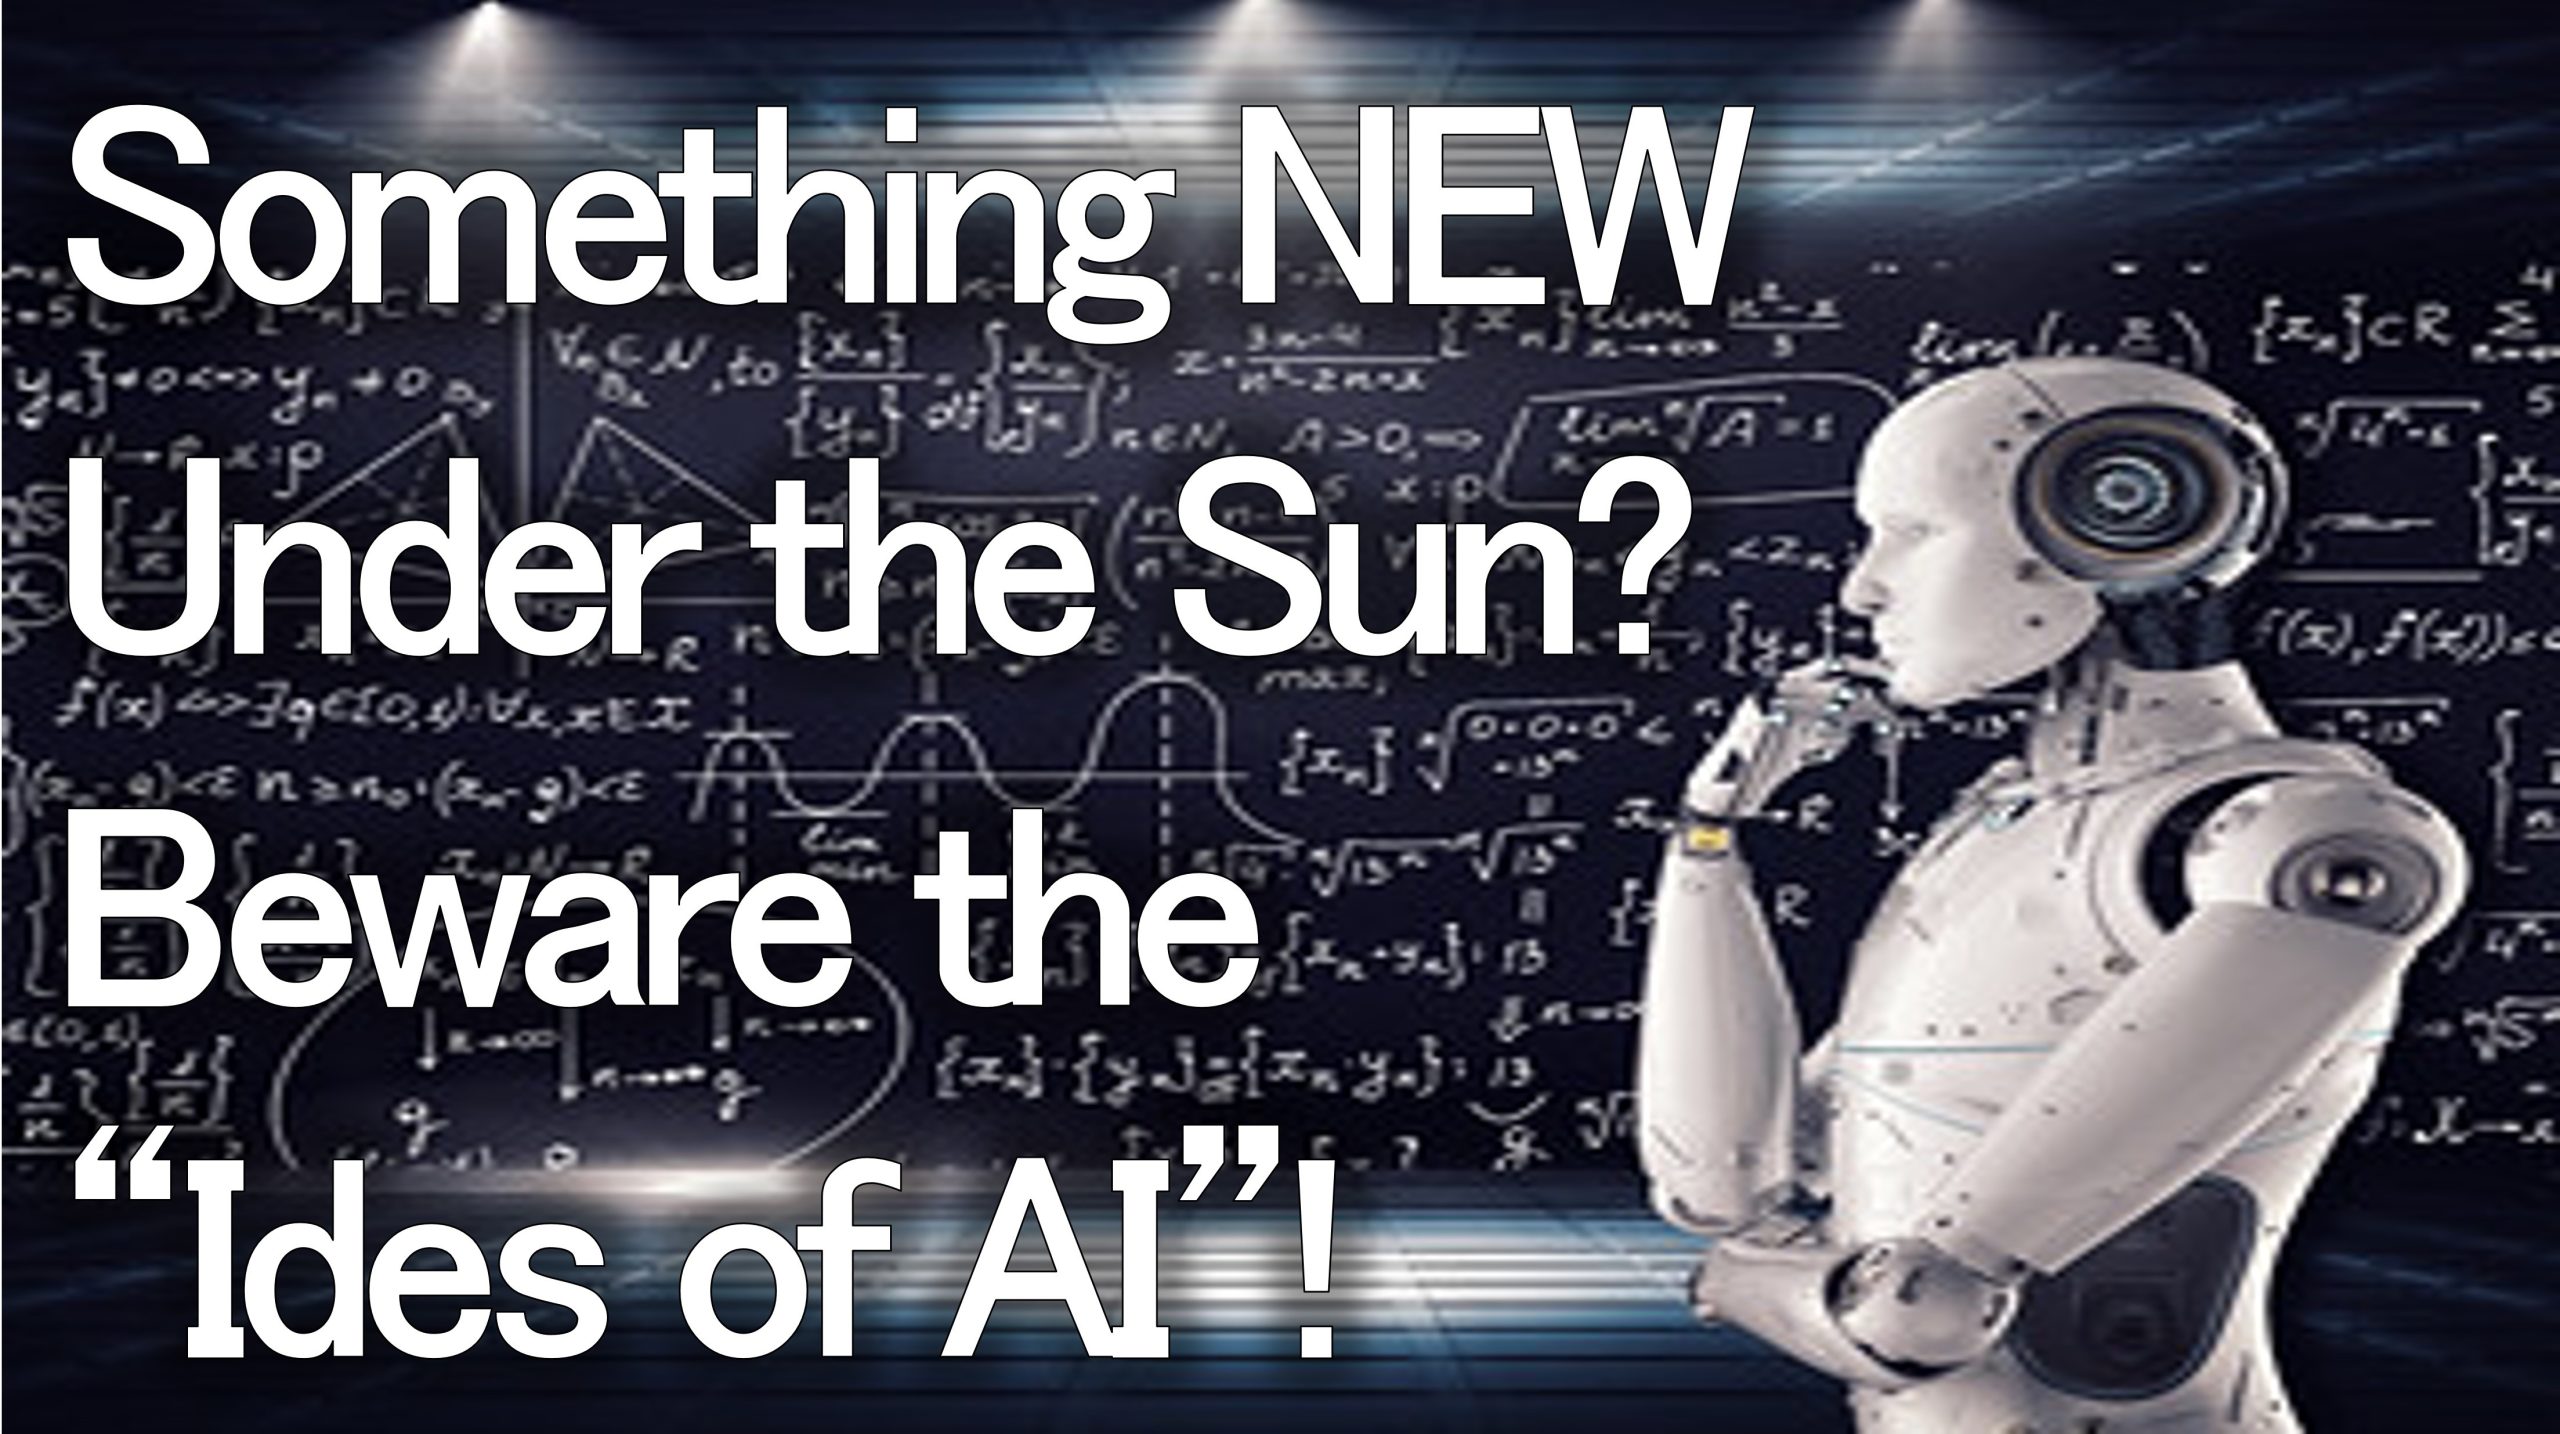 You are currently viewing Something NEW Under the Sun? Beware the “Ides of AI”! – May 21st